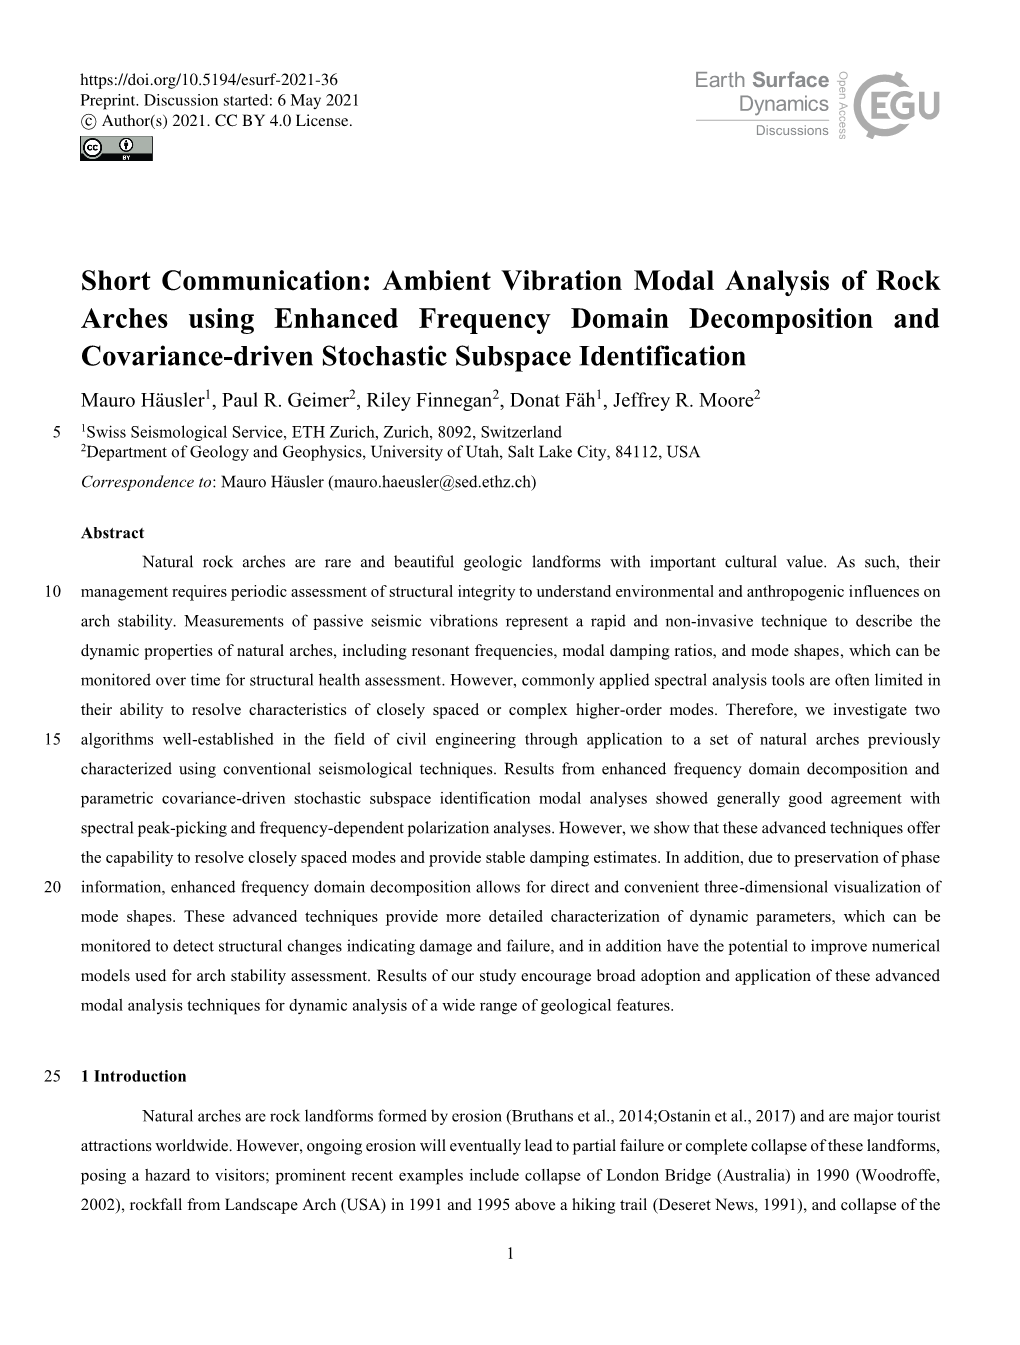 Ambient Vibration Modal Analysis of Rock